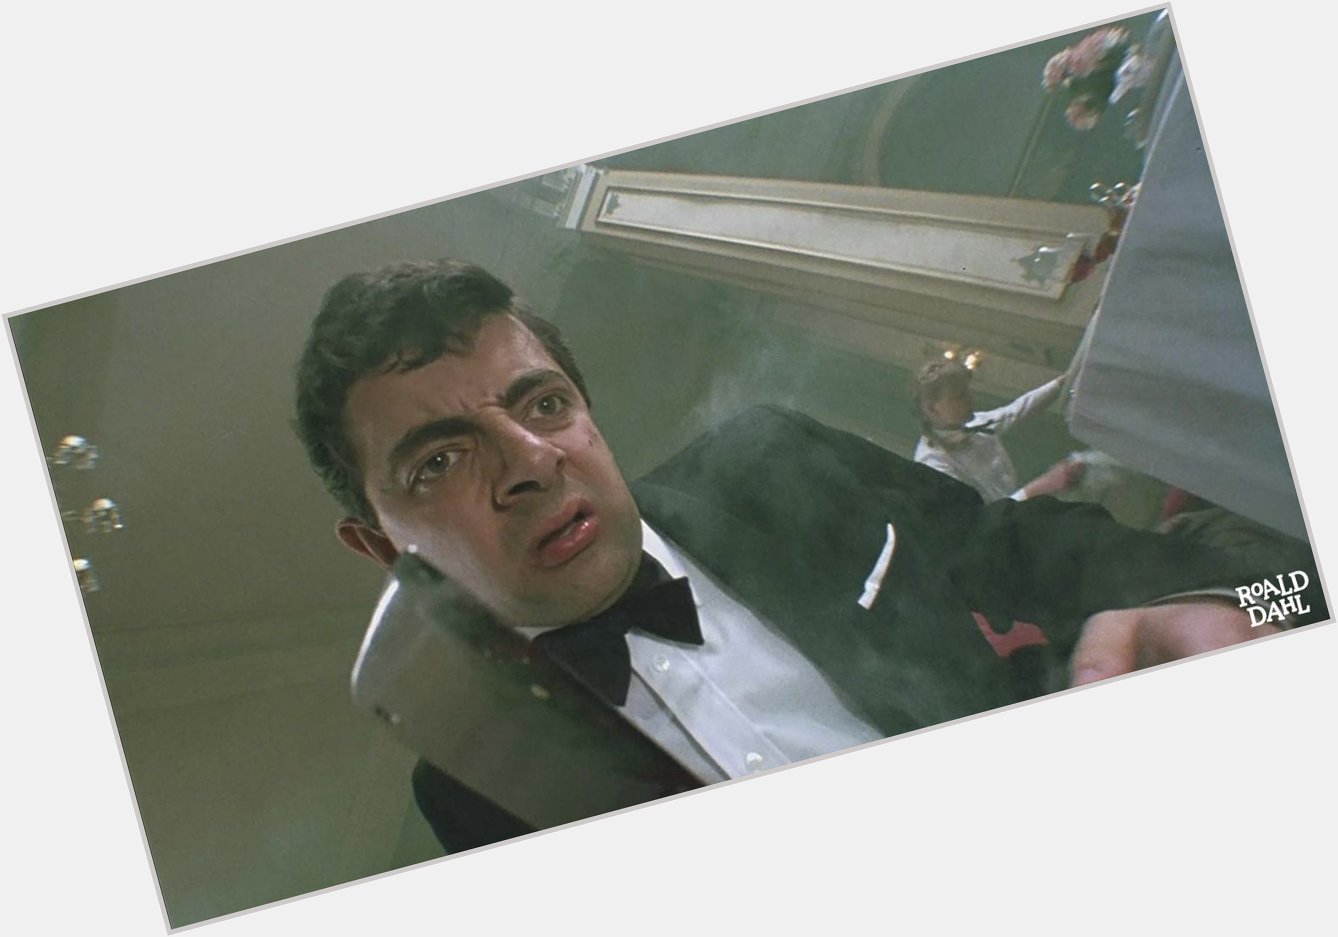 We hope our favourite haughty hotel manager has a better day than this today...

Happy birthday, Rowan Atkinson! 